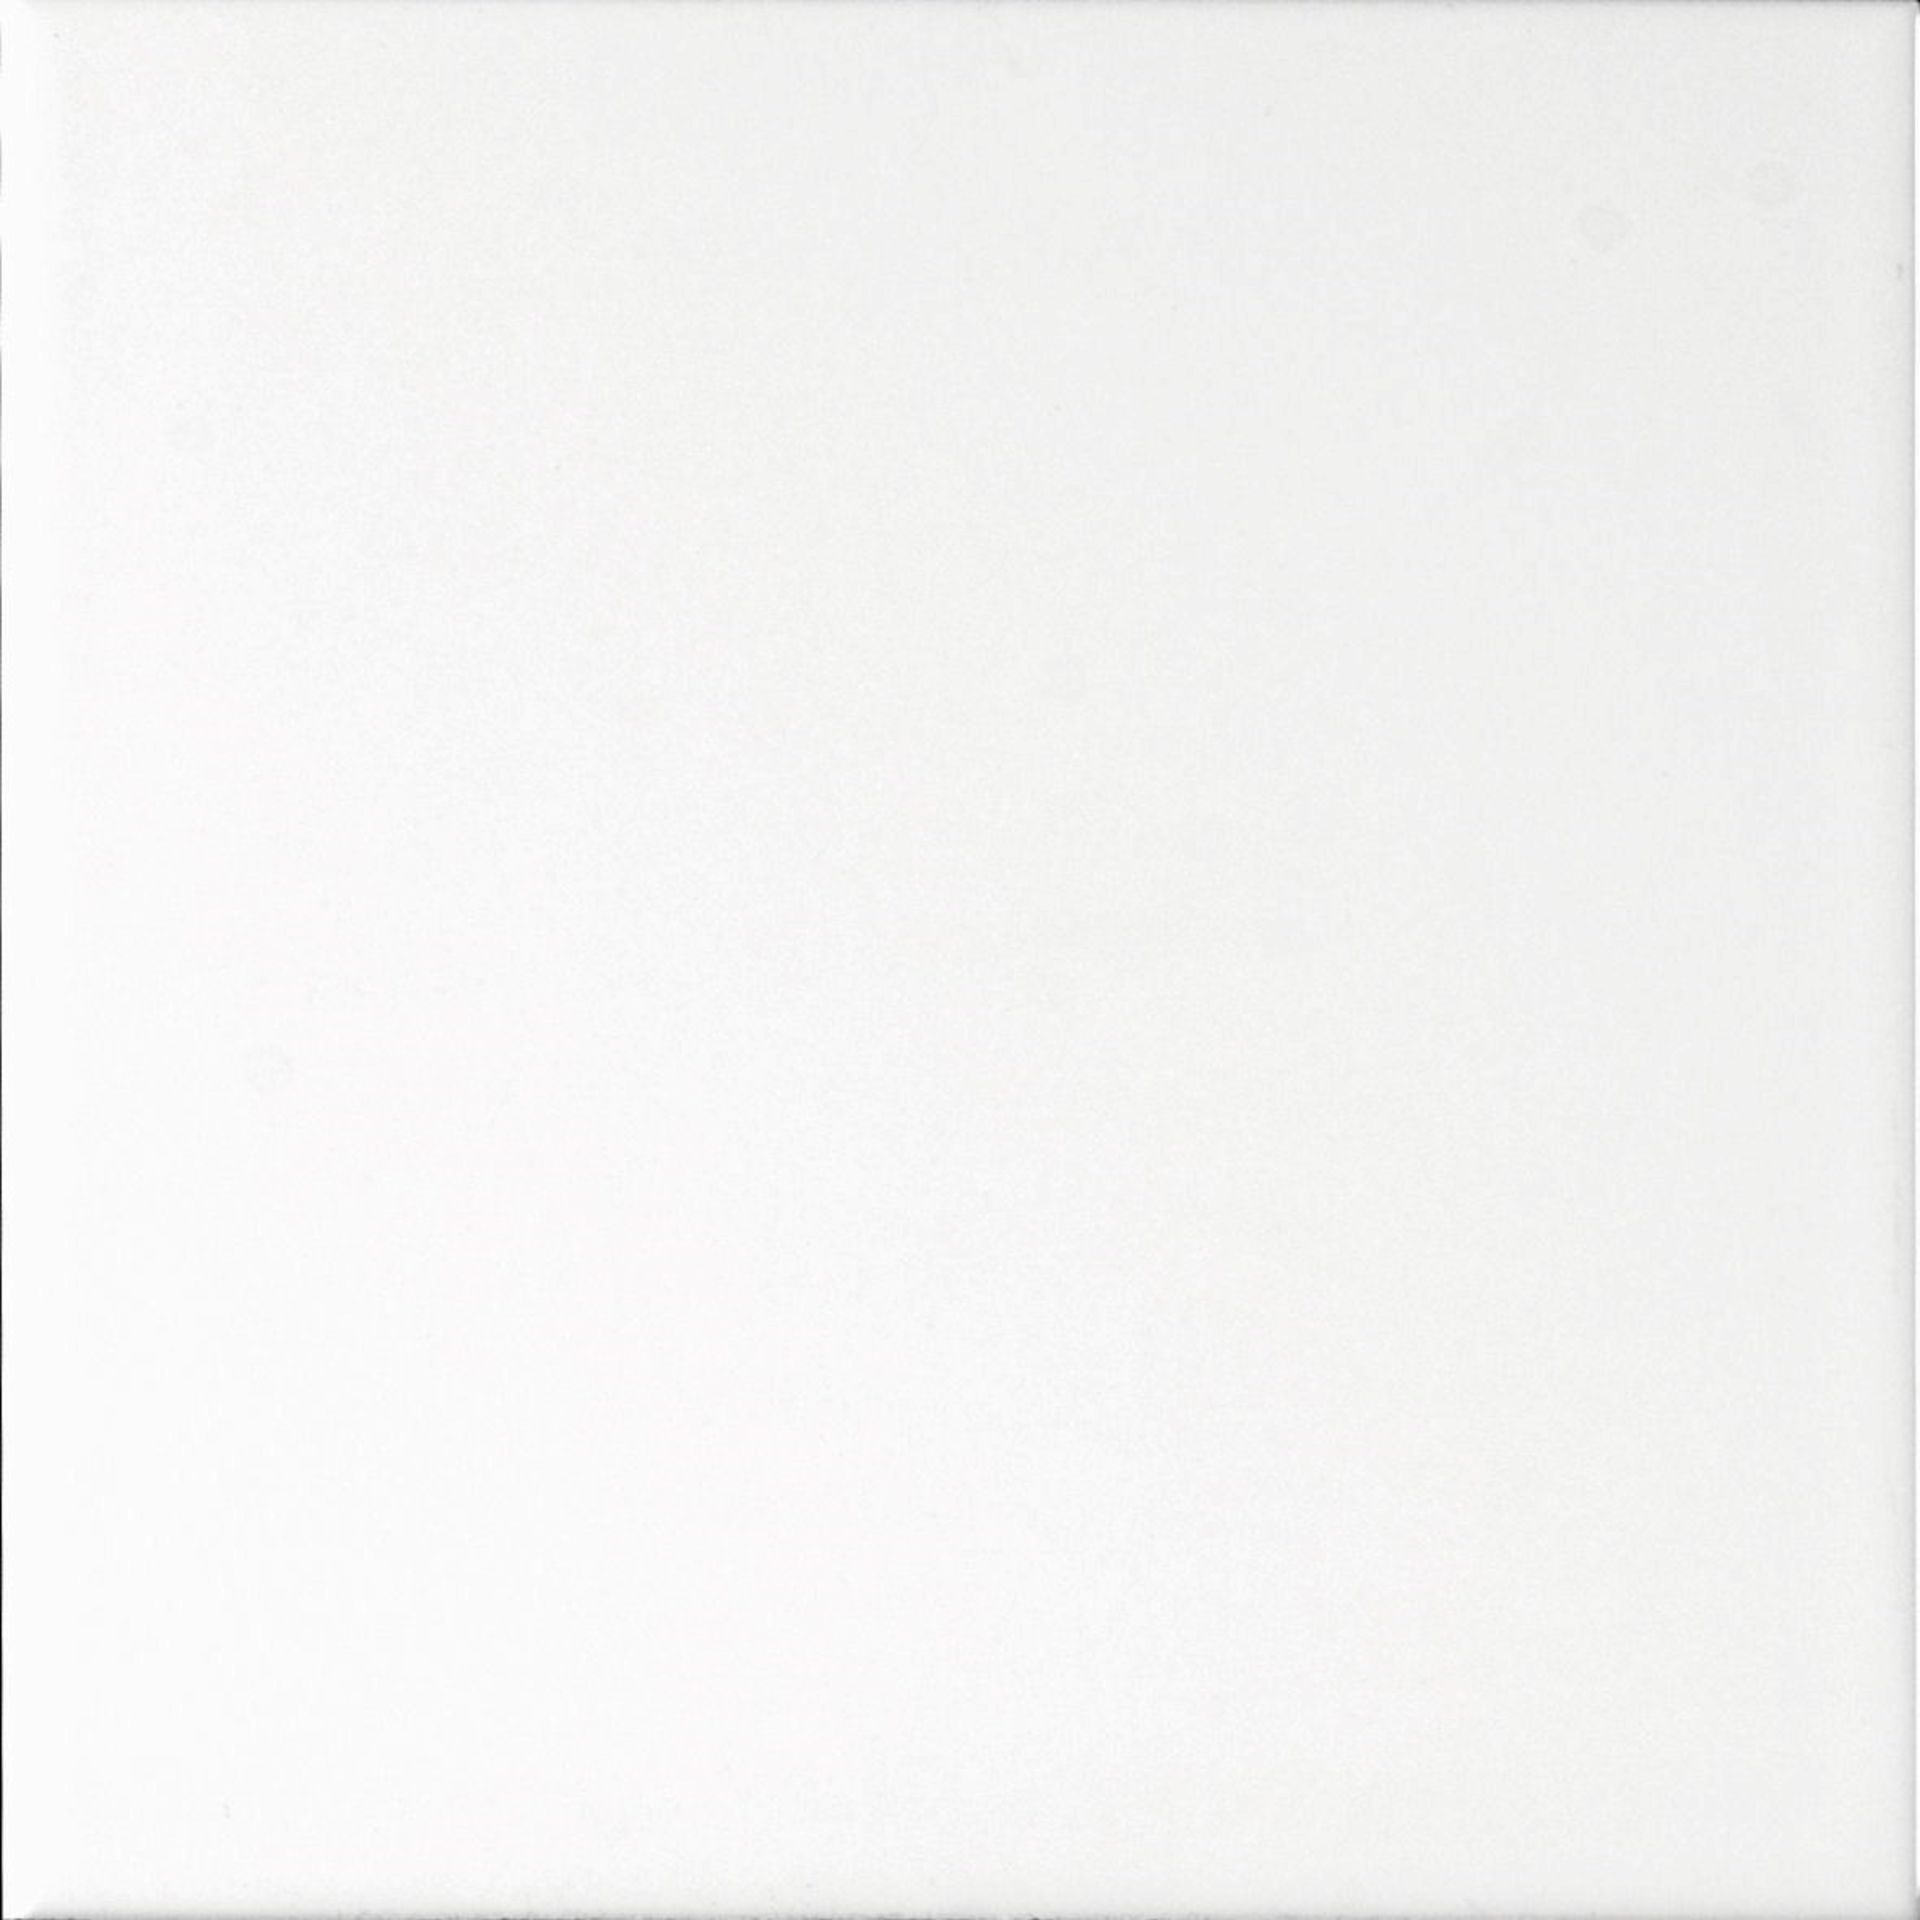 Brand New 6m2 150x150mm White Square Procelian Wall Tiles. White tiles are an essential product that - Image 4 of 4